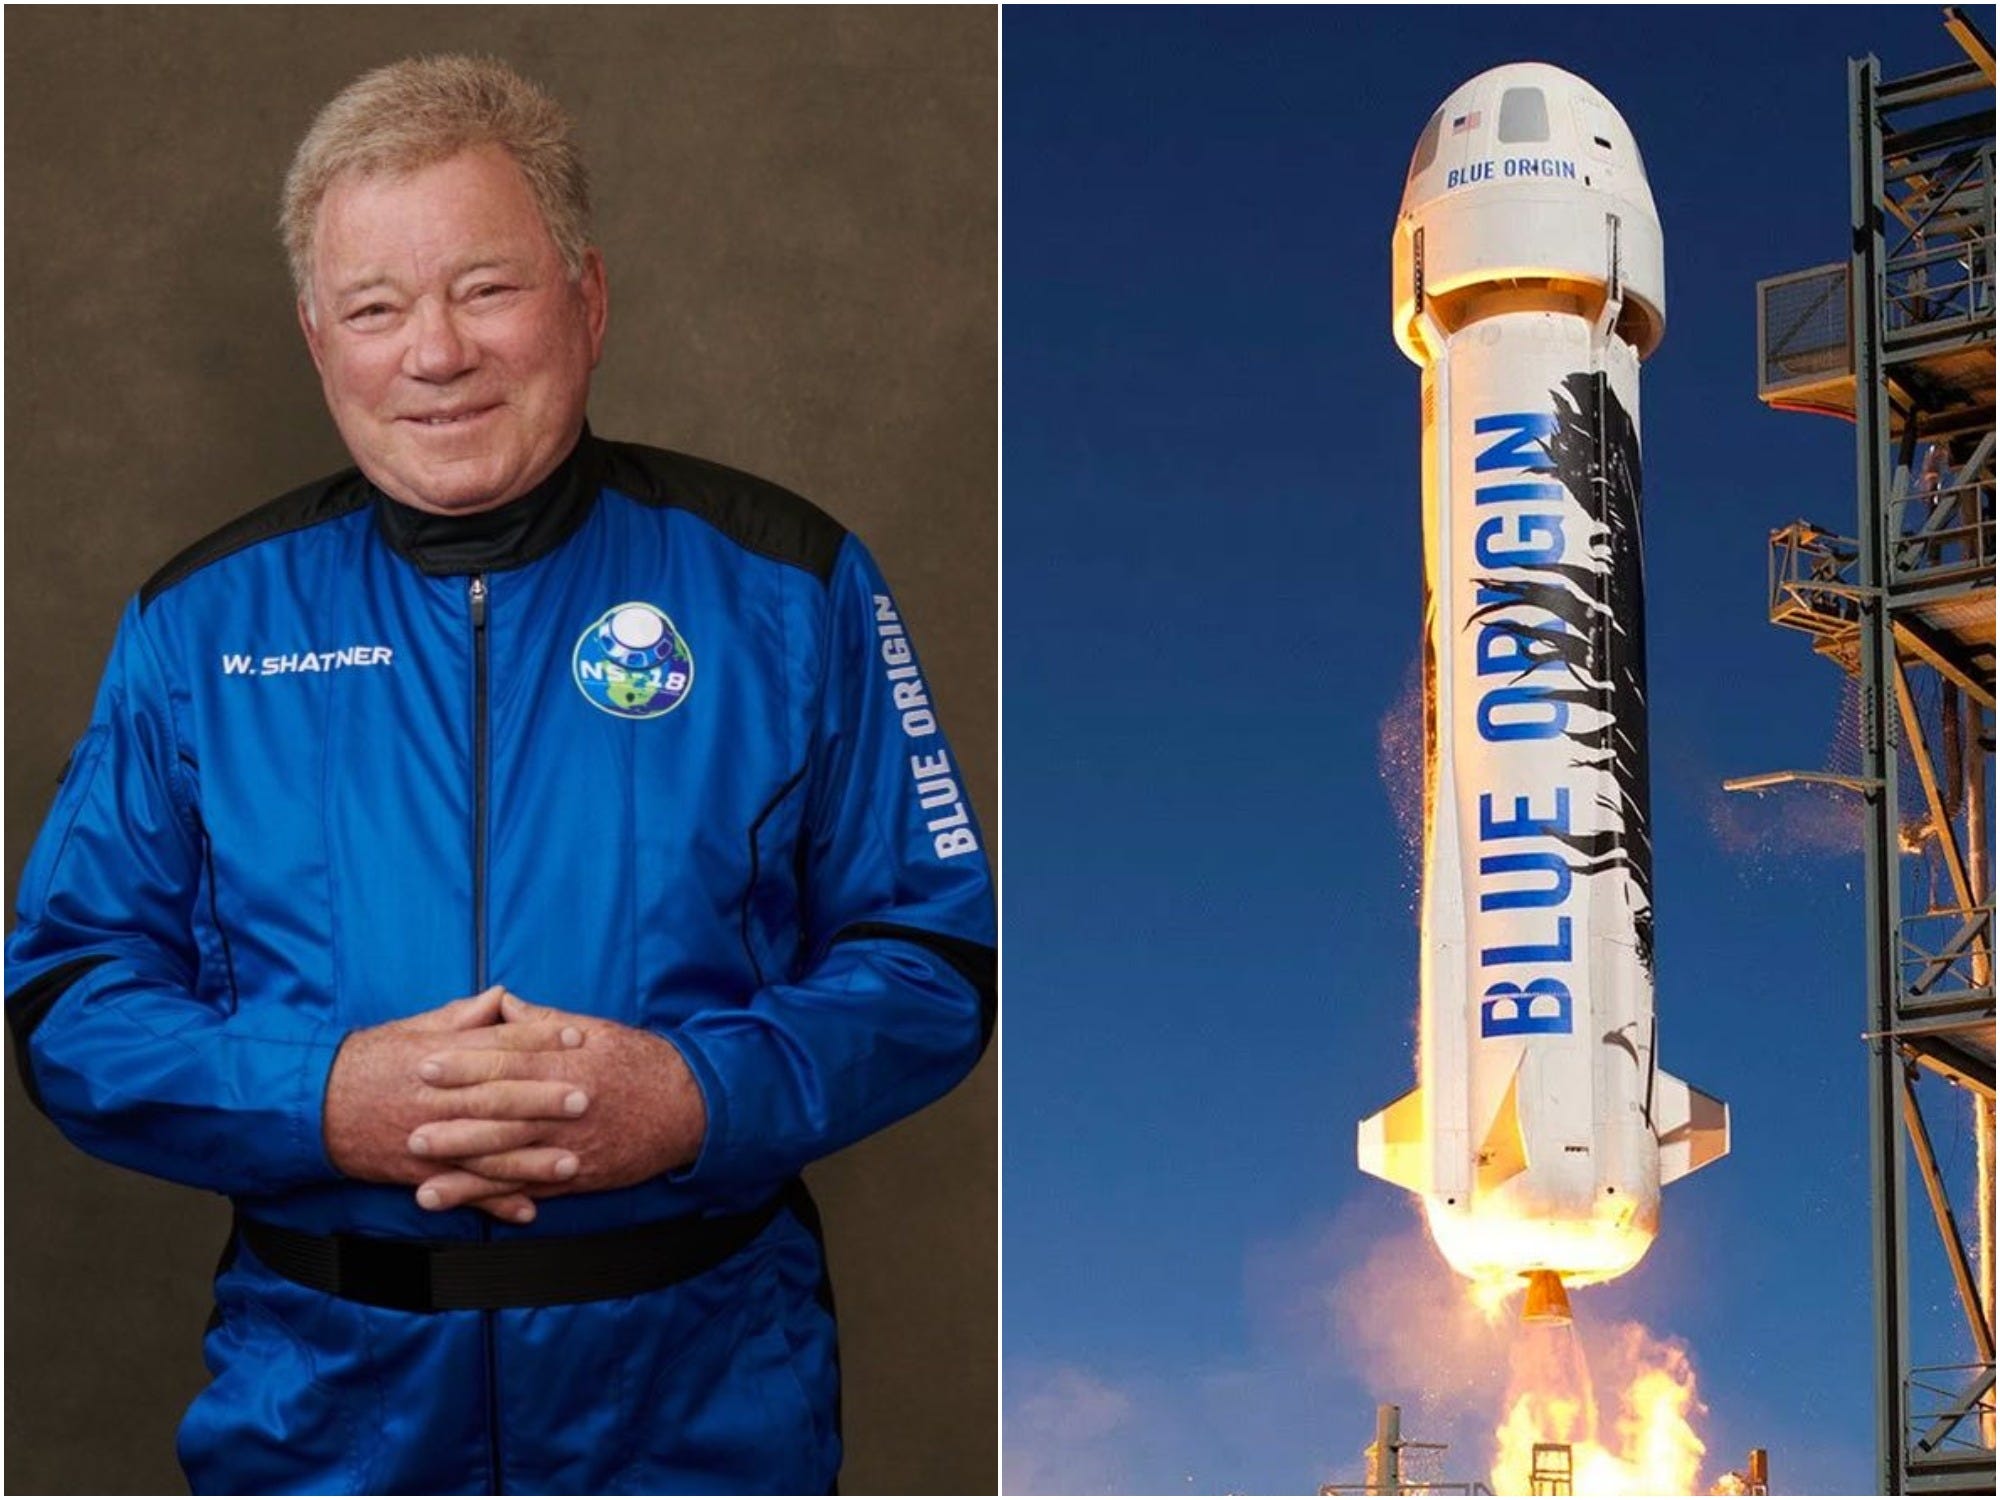 william shatner in blue flight jumpsuit side by side with new shepard rocket launching